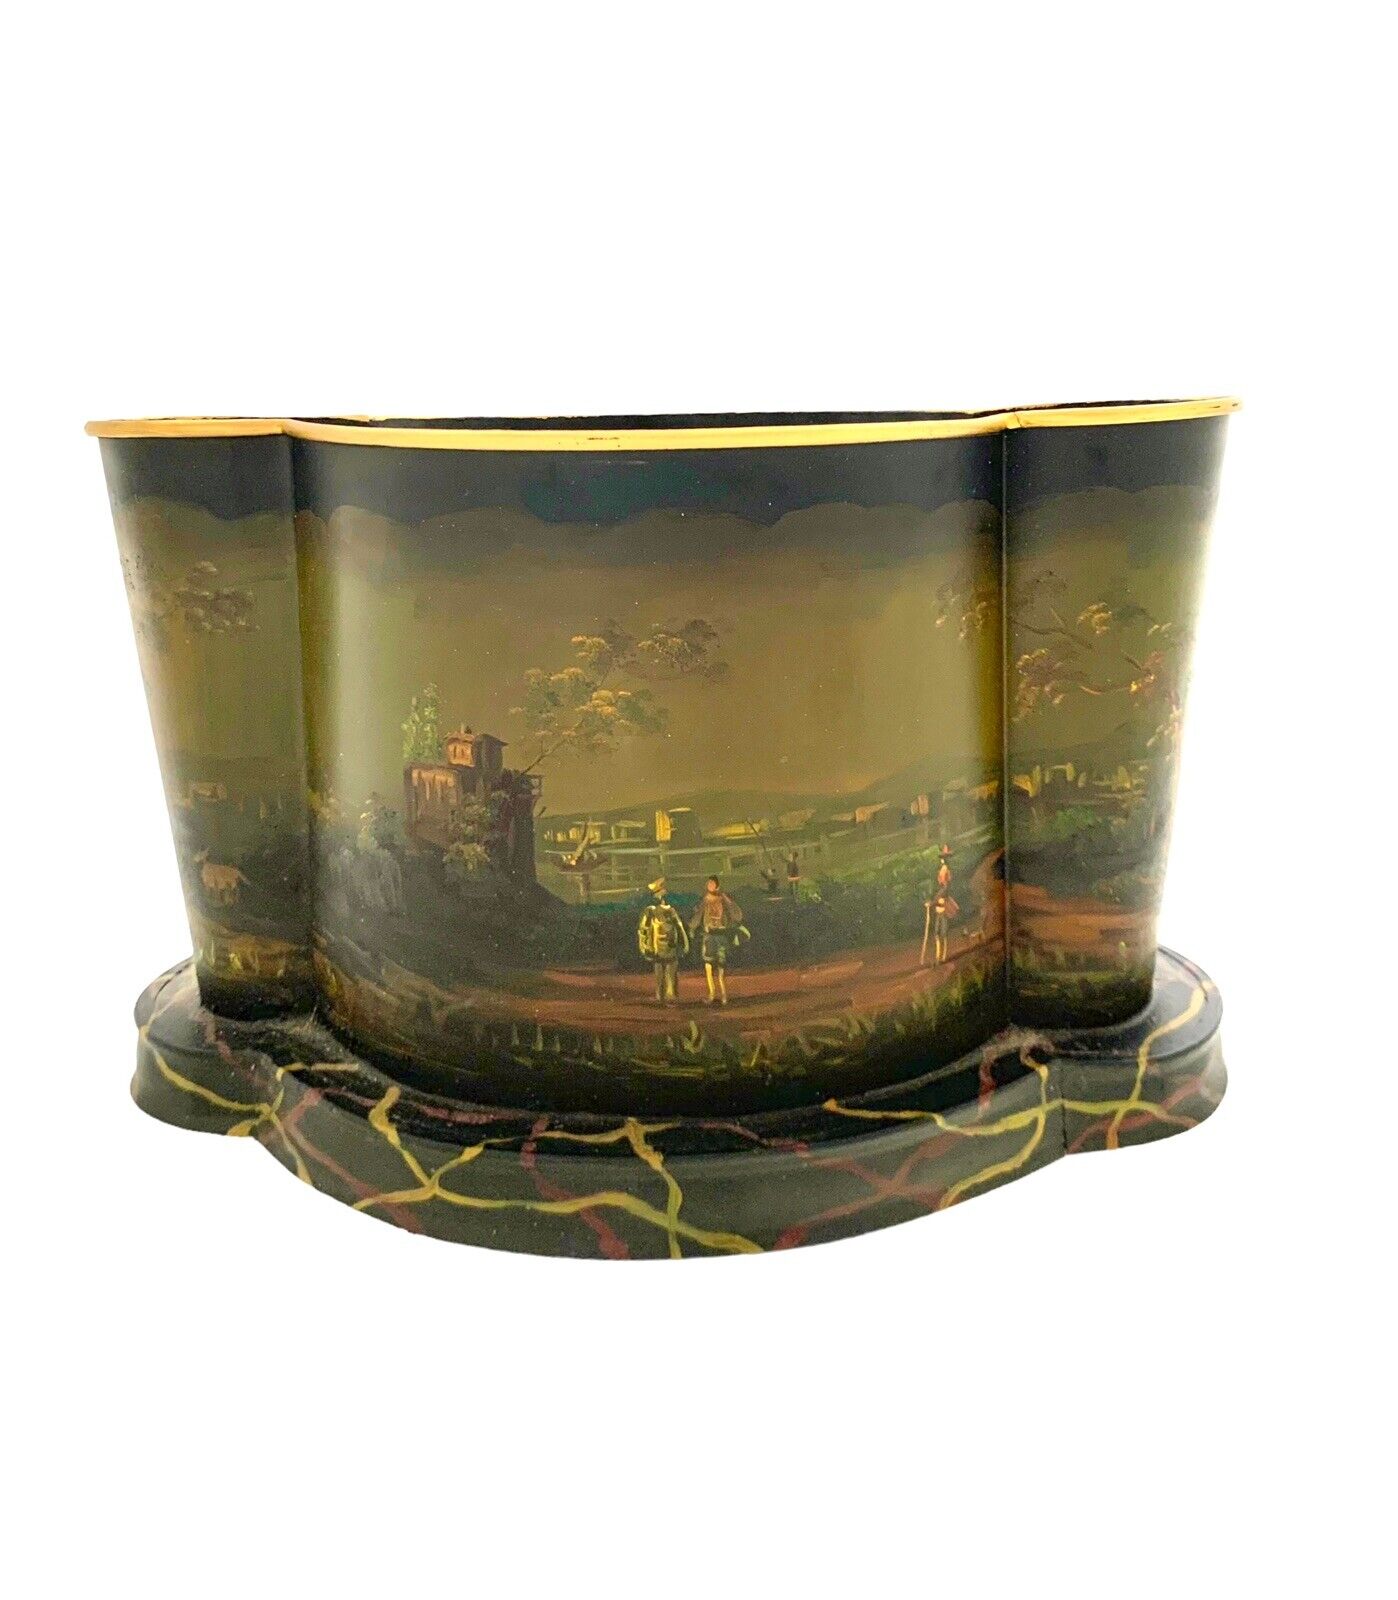 Metal Basket Painted Tole British Scenery Bin Container Vintage Decor